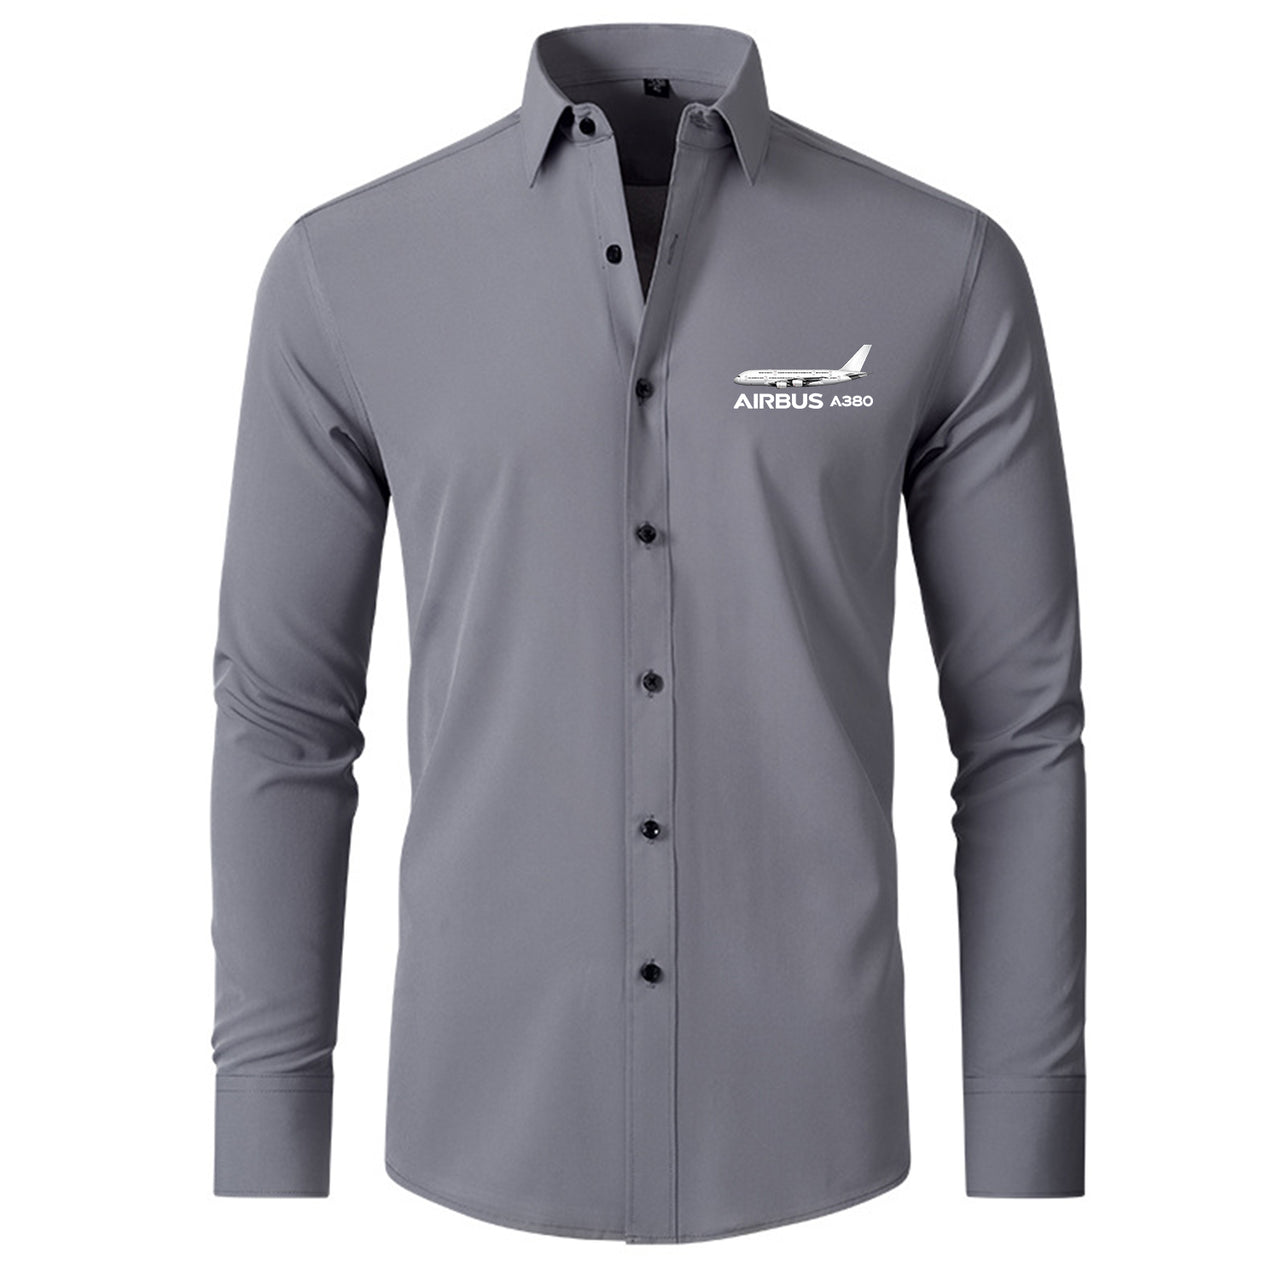 The Airbus A380 Designed Long Sleeve Shirts